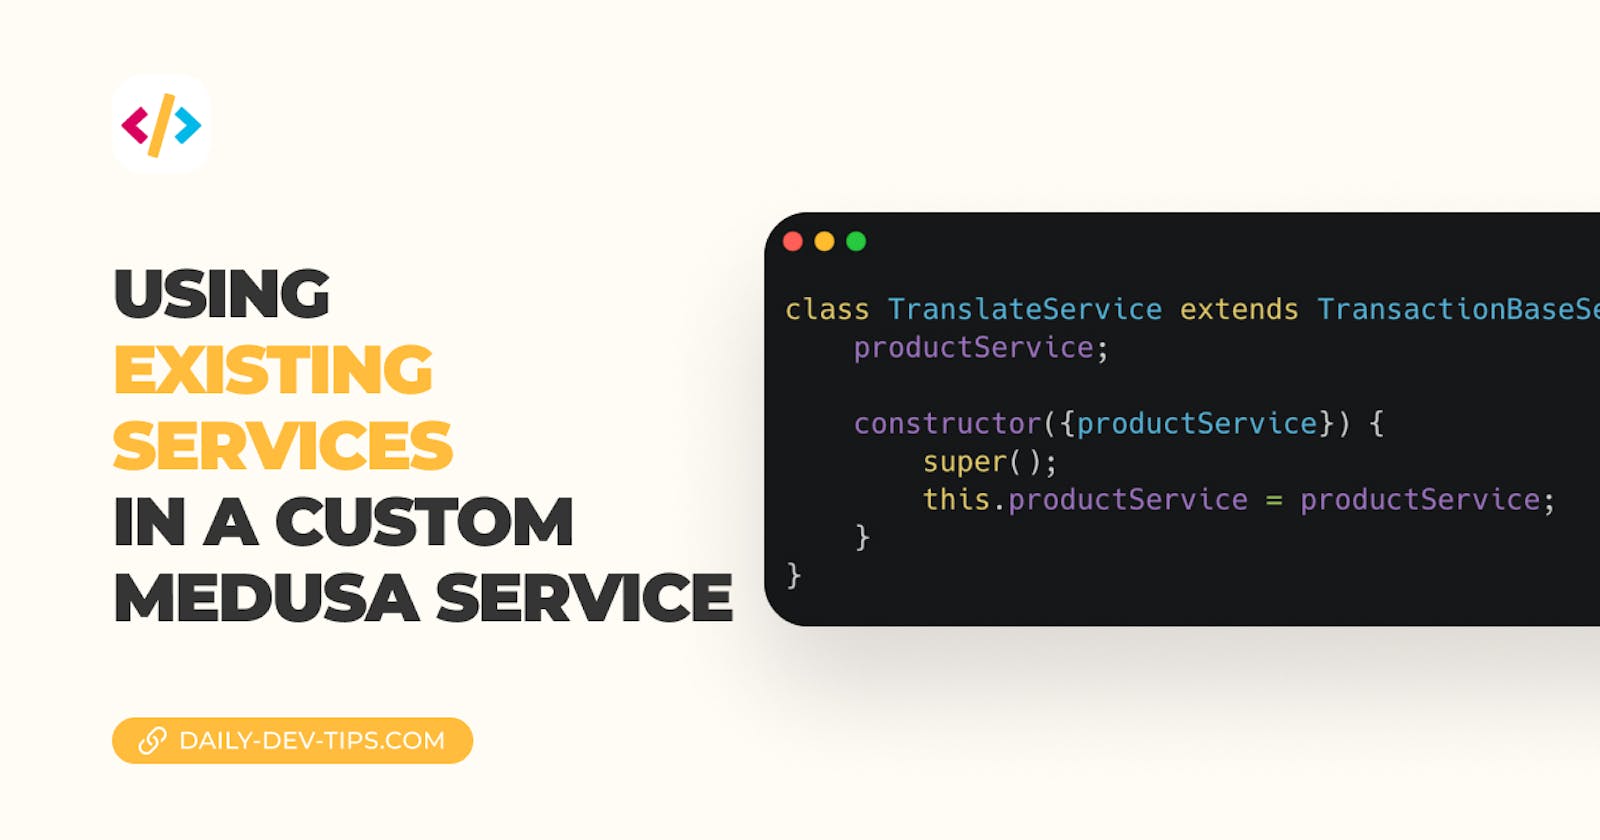 Using existing services in a custom medusa service